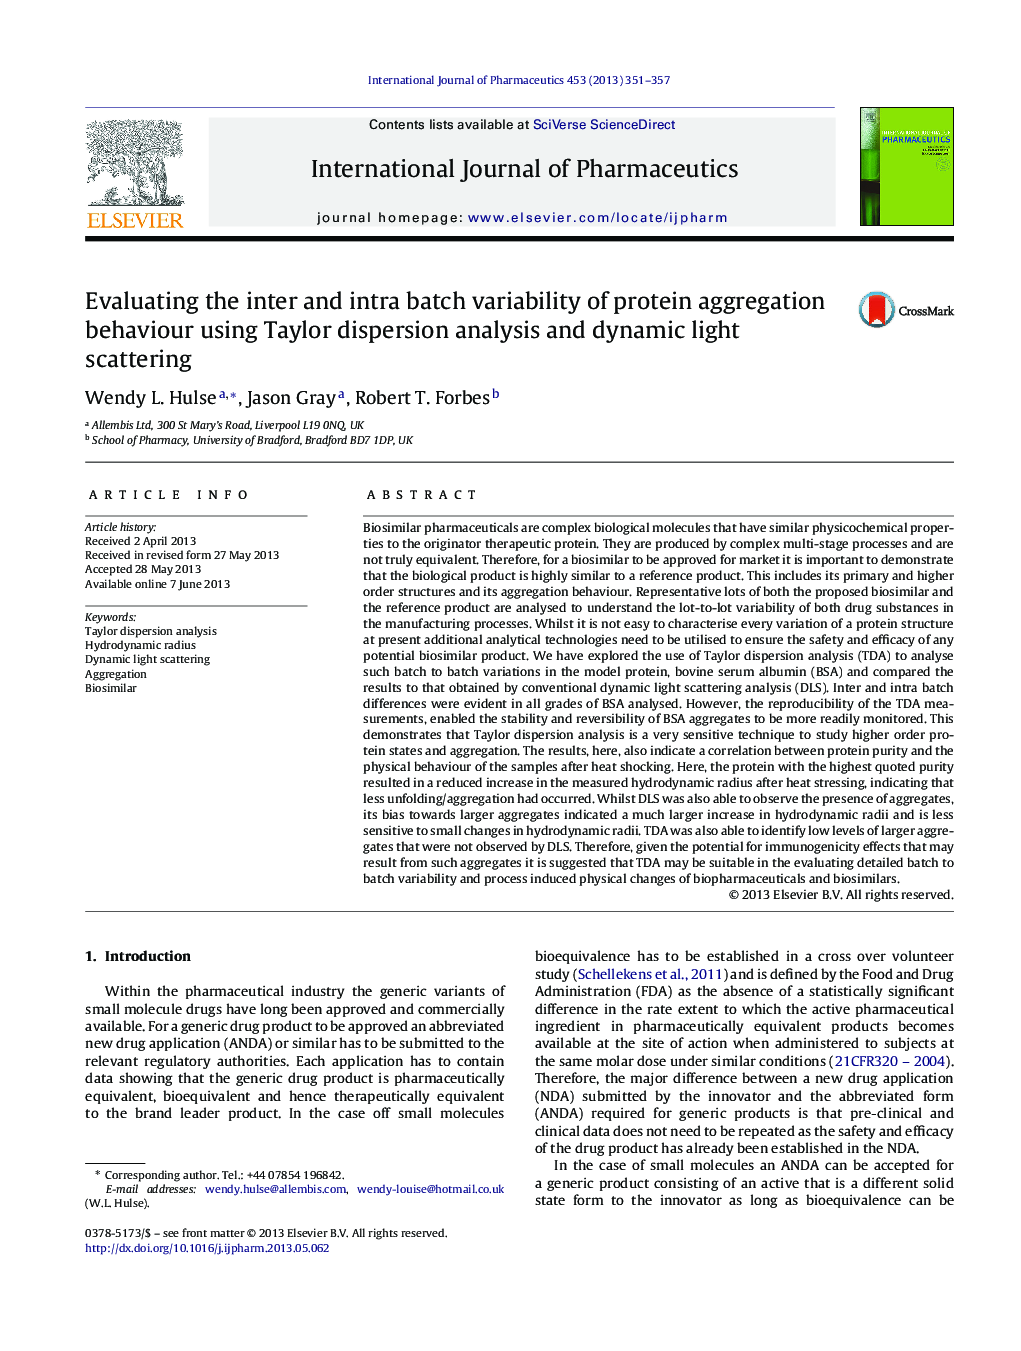 Evaluating the inter and intra batch variability of protein aggregation behaviour using Taylor dispersion analysis and dynamic light scattering